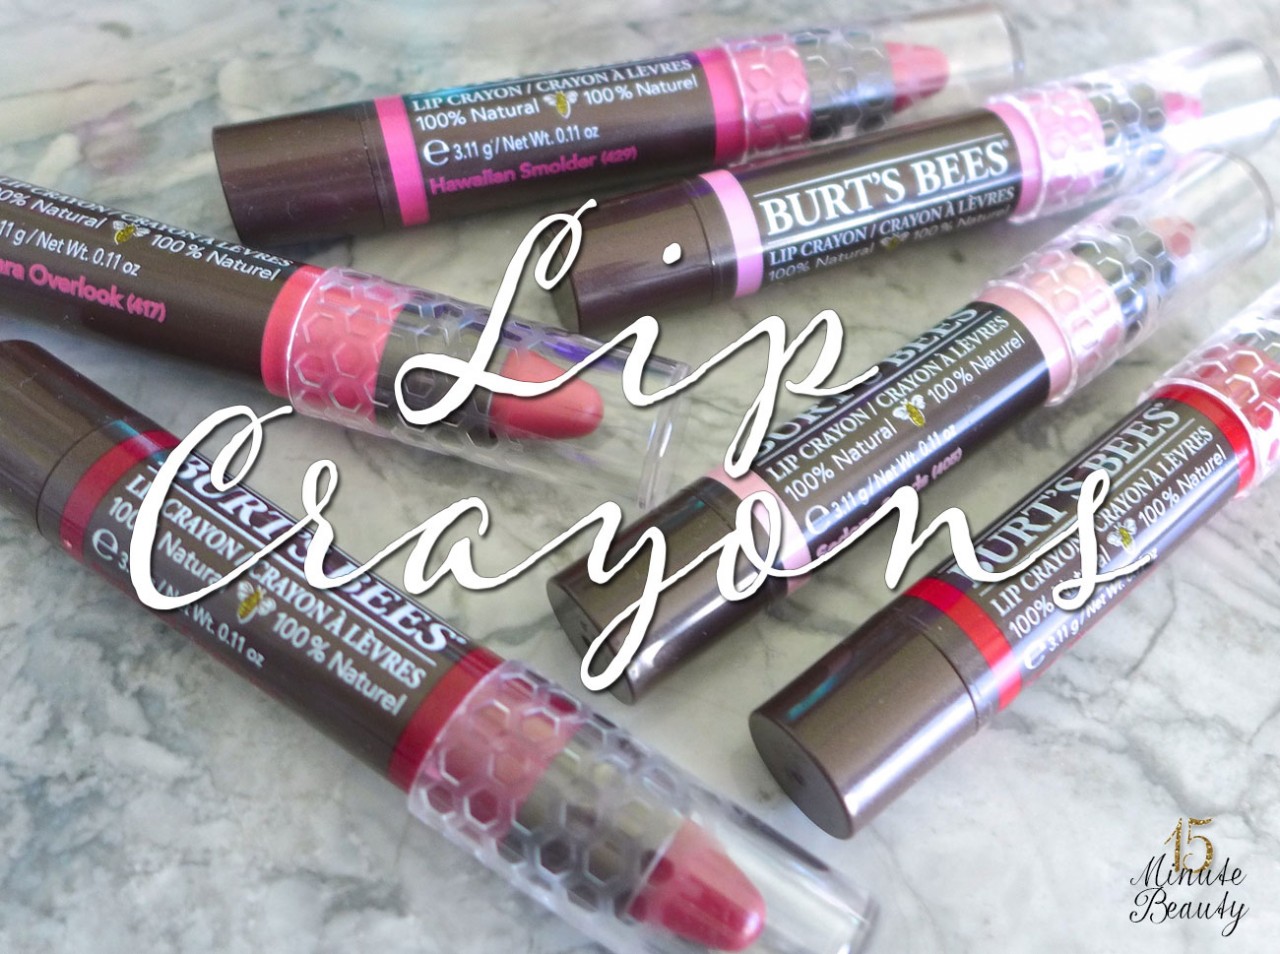 Inspired by Nature: Burt's Bees Lip Crayons